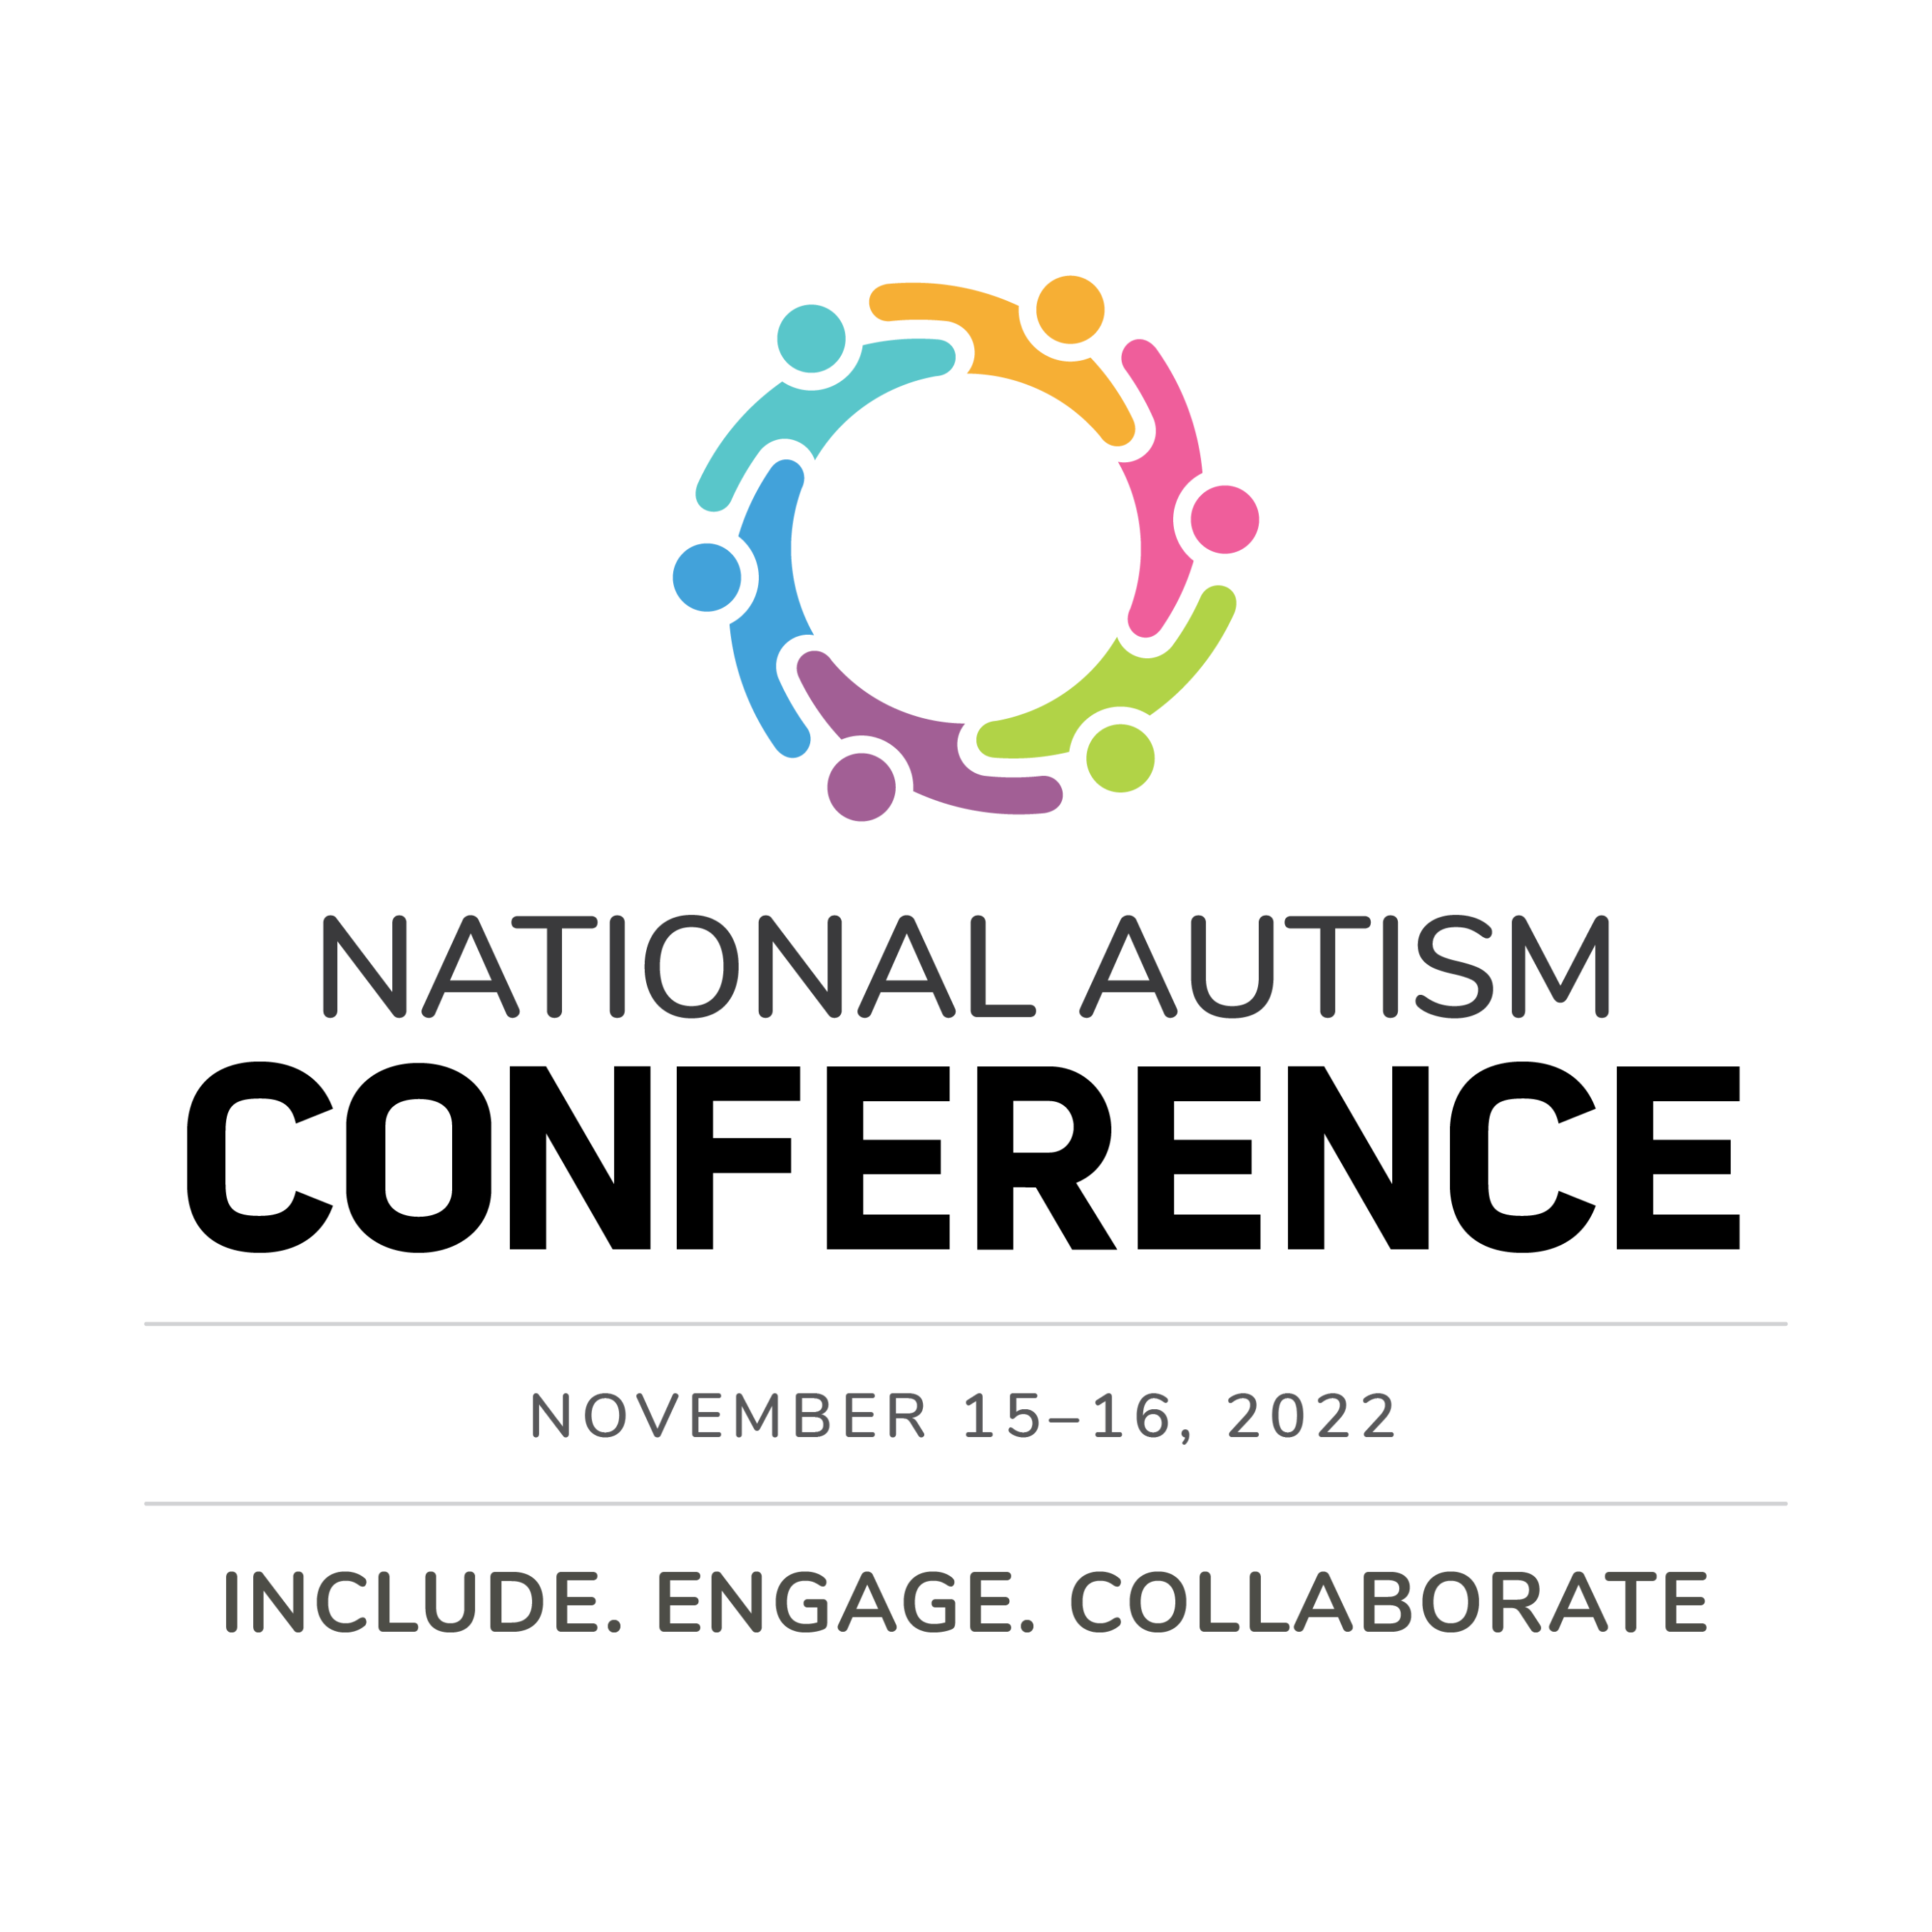 A logo with an image of colorful, gender-neutral human figures holding one another in the shape of a circle that signifies diversity and inclusion. National Autism Conference, November 15-16, 2022, Include. Engage. Collaborate.